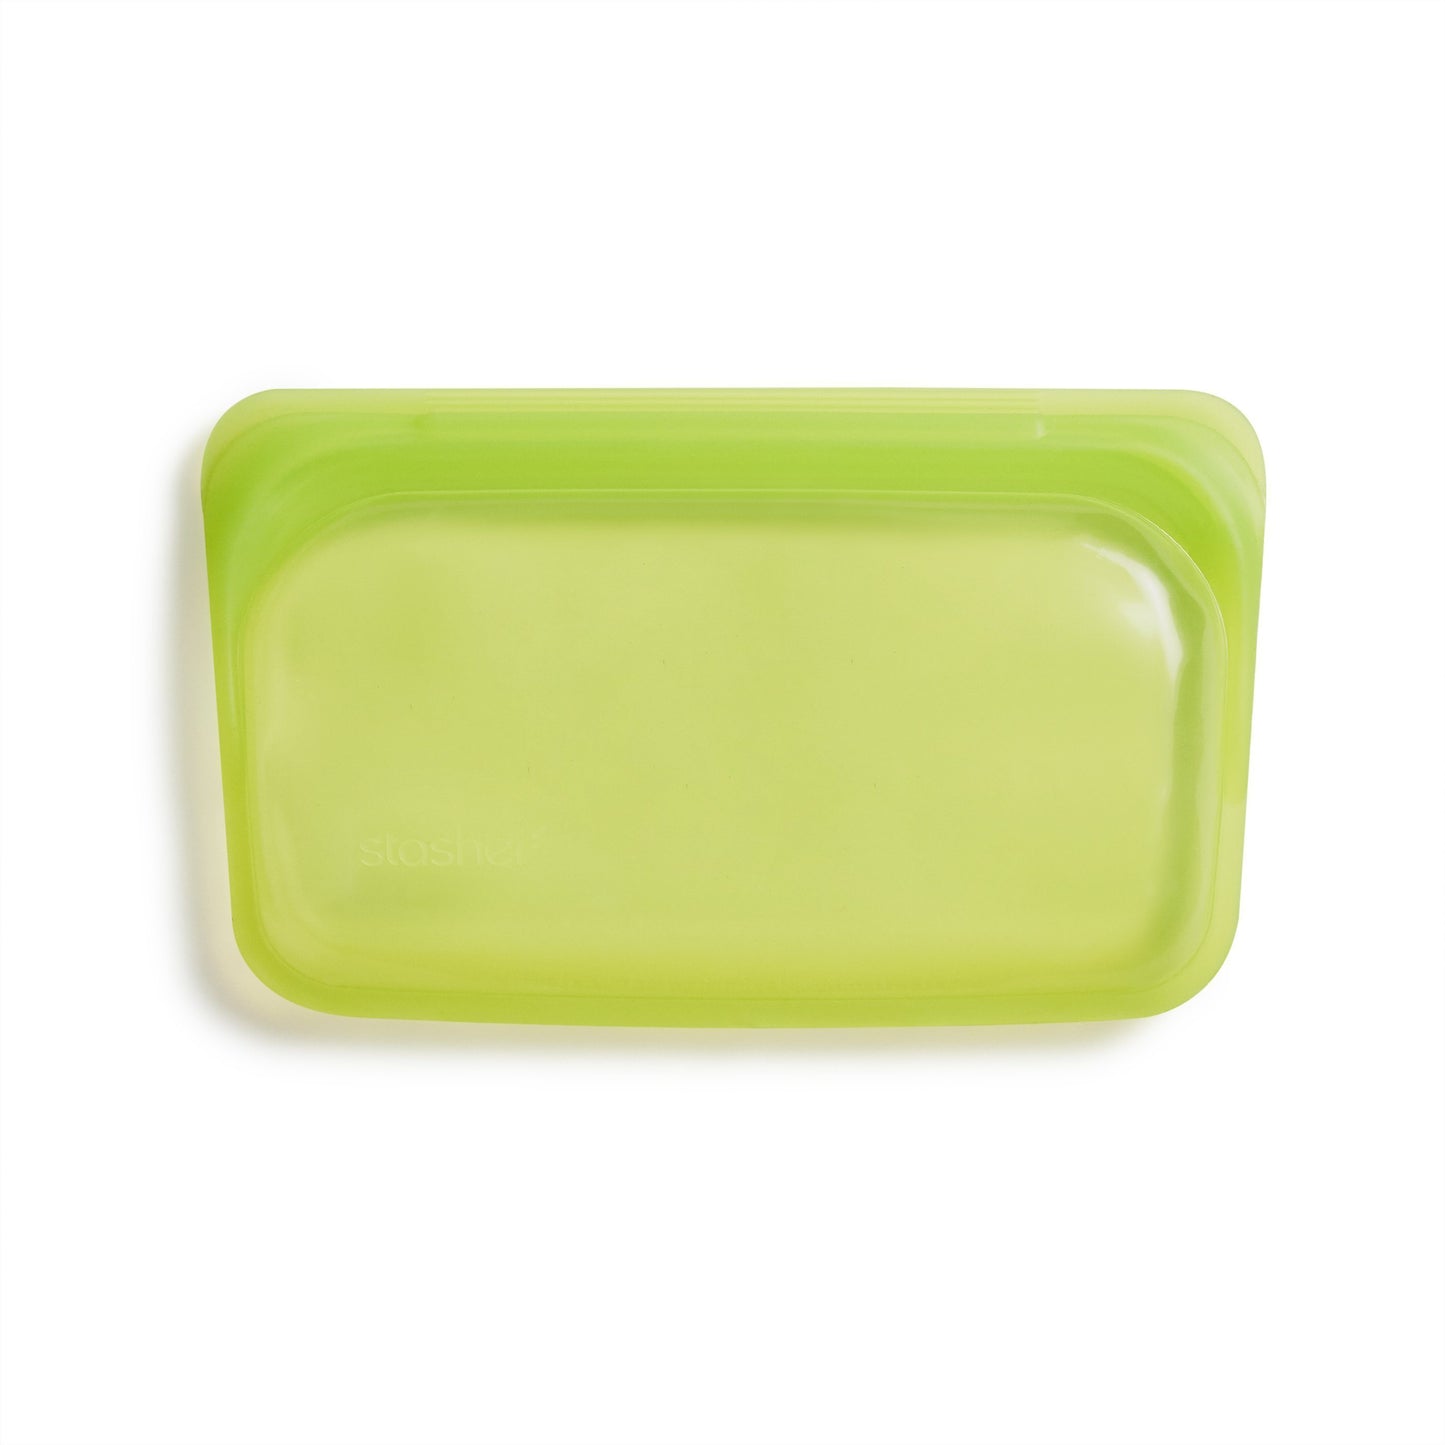 Stasher Reusable Storage Bags - Snack on the go Stasher Lime Prettycleanshop